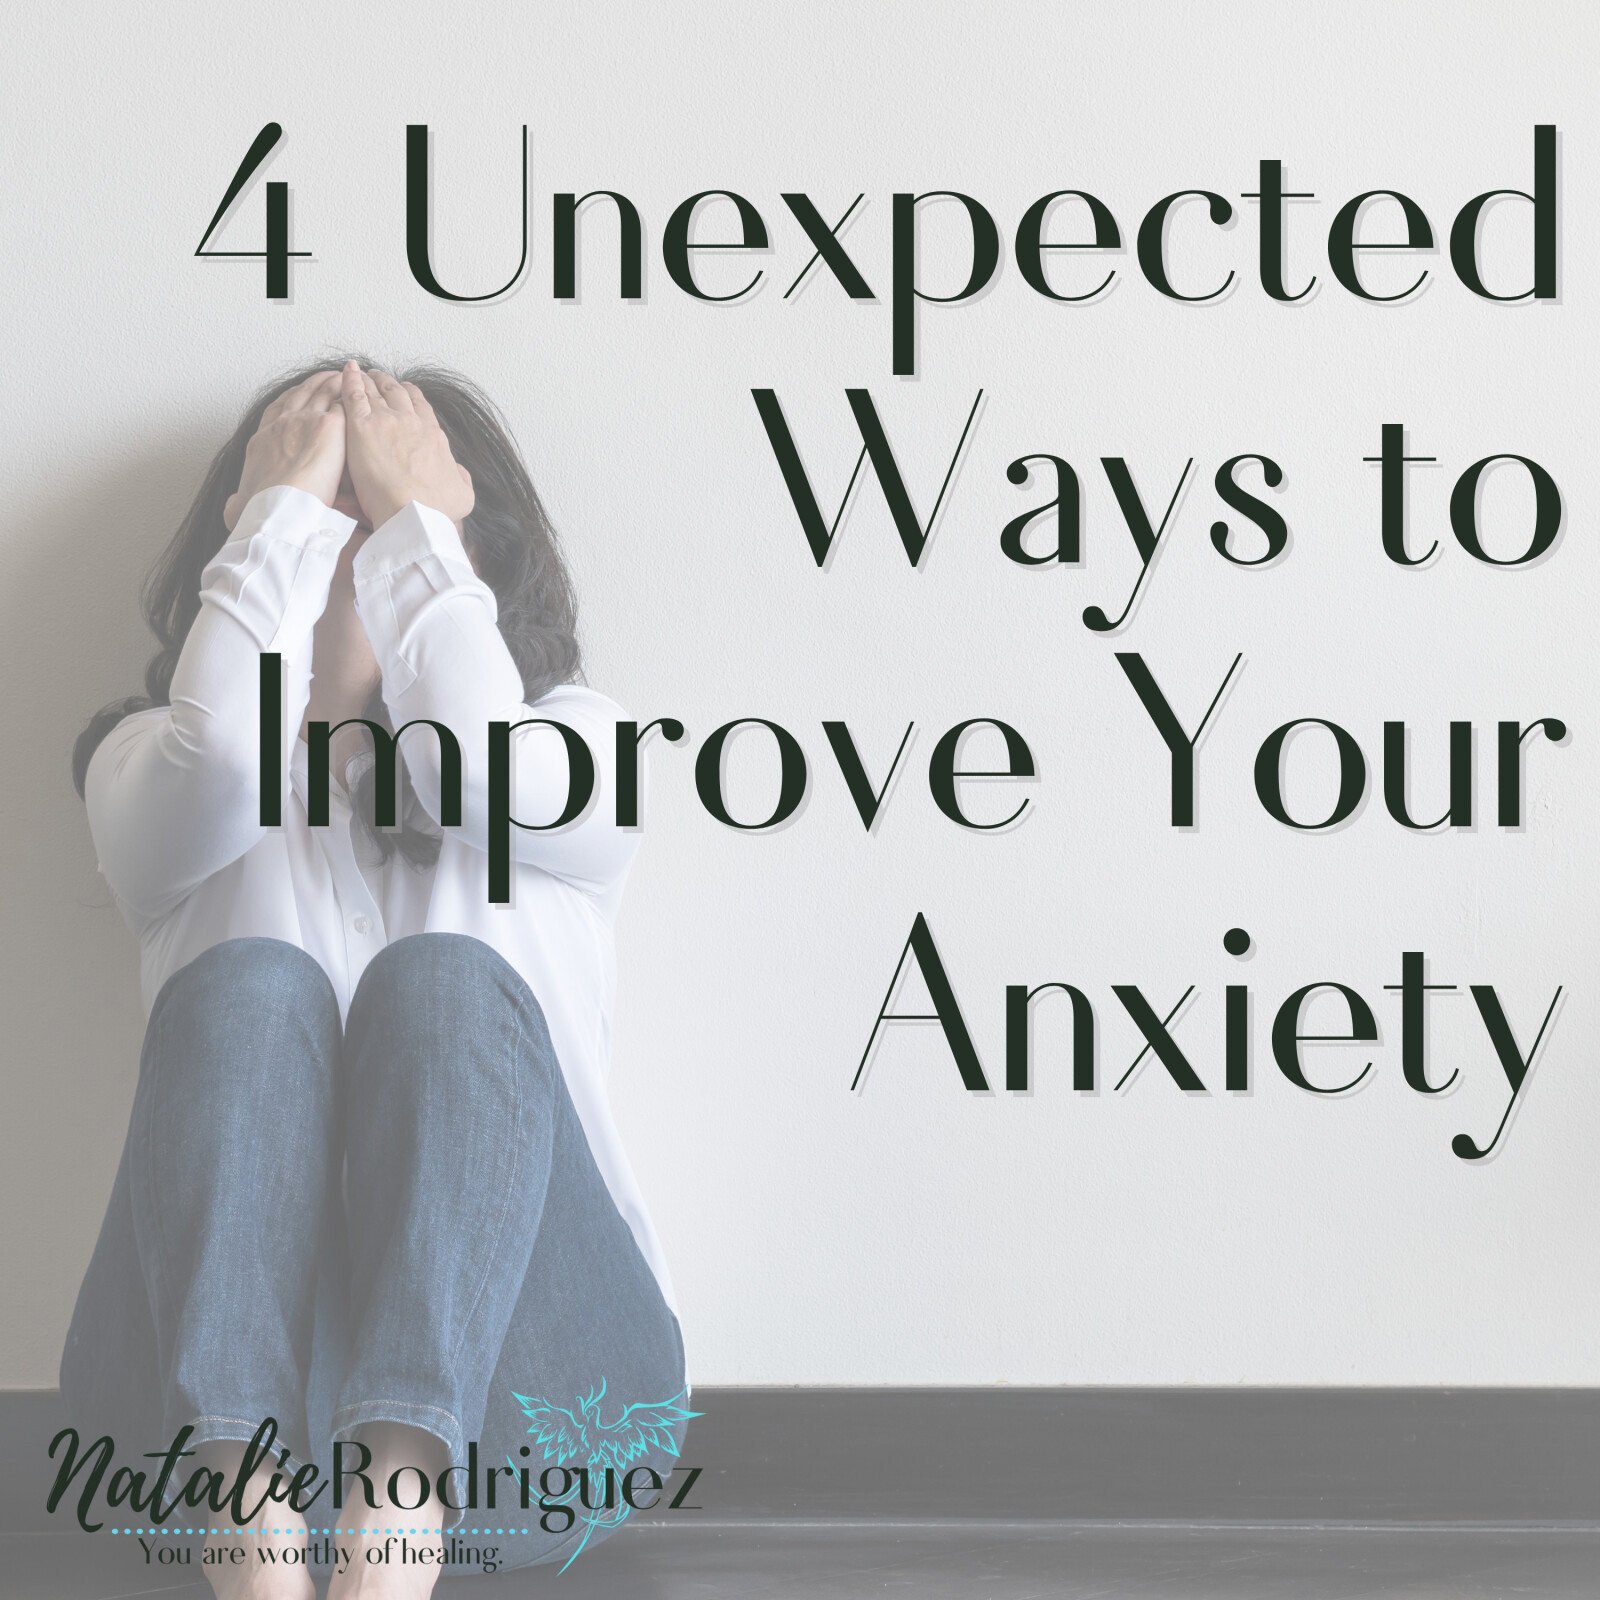 4 Unexpected Ways to Improve Anxiety - Part 1